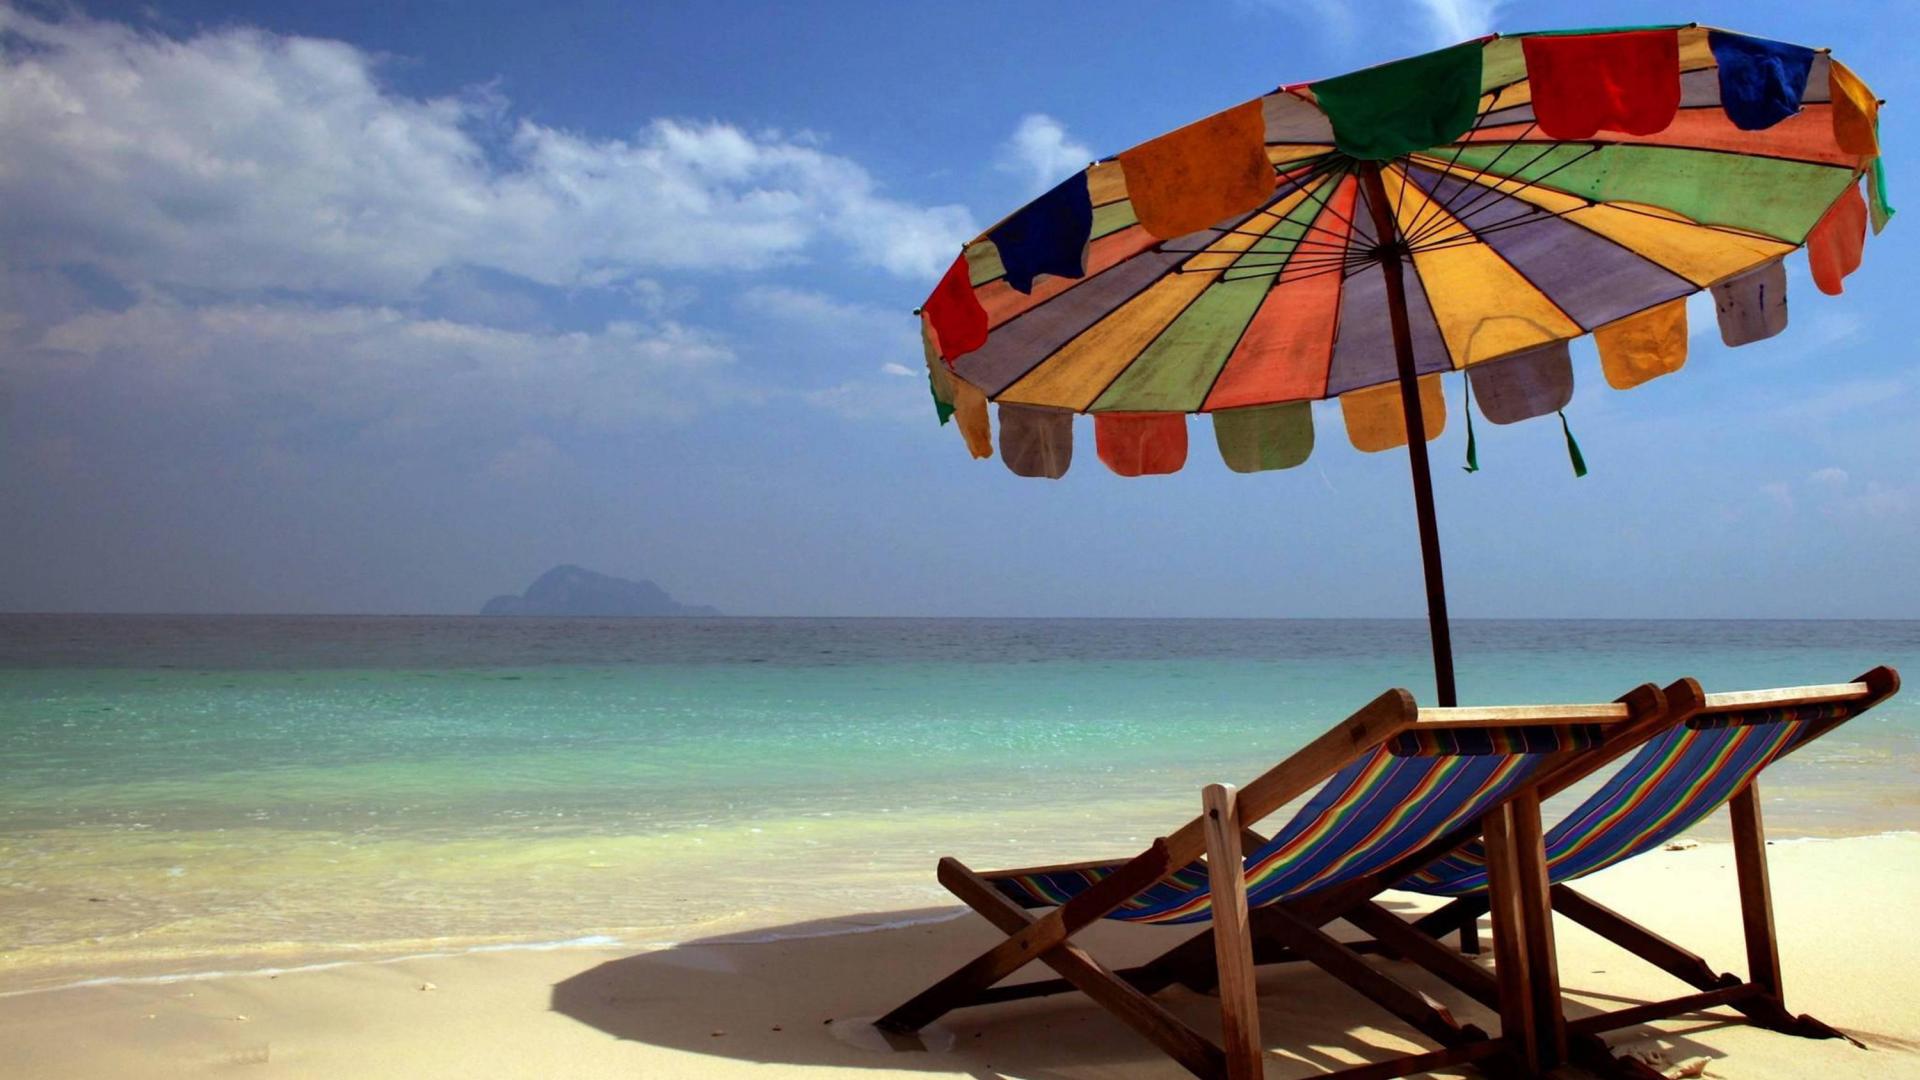 Beach Parasol High Quality And Resolution Wallpaper On